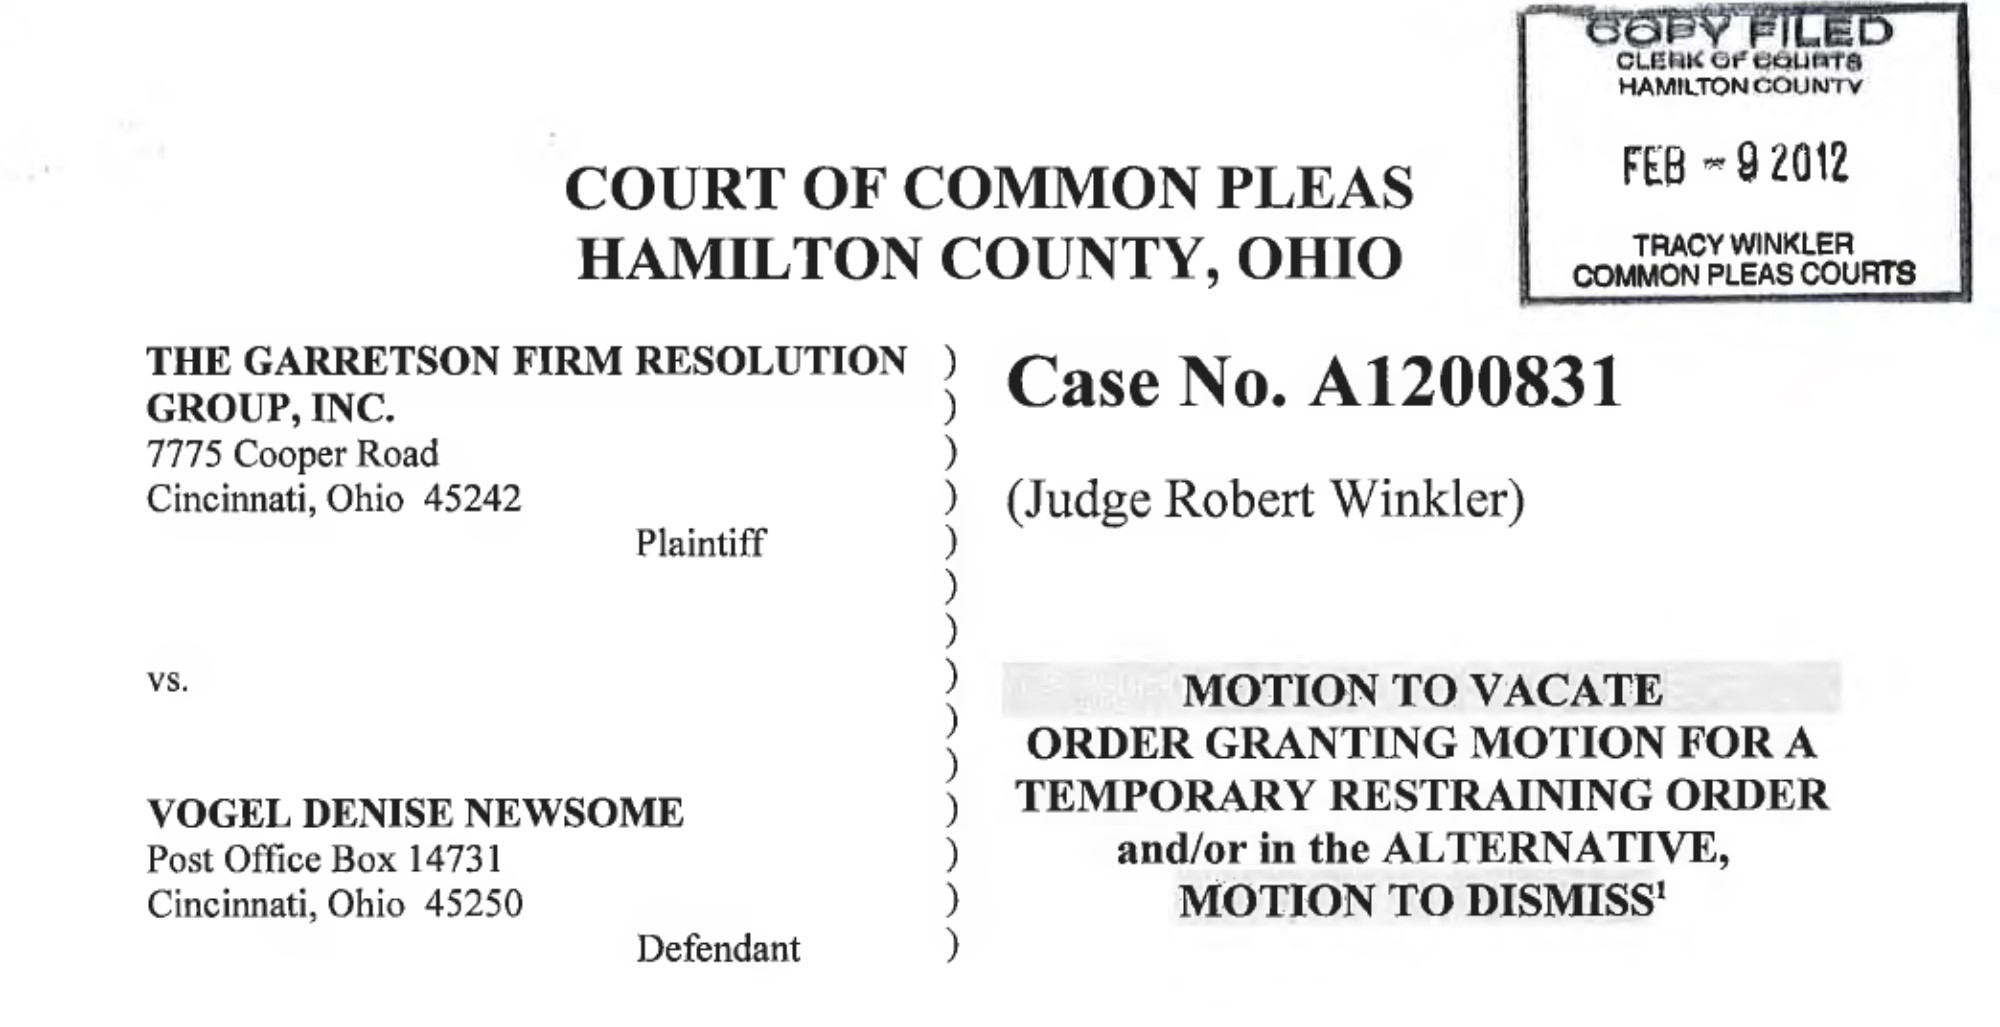 020912 Motion To Vacate GARRETSON Resolution Group Lawsuit